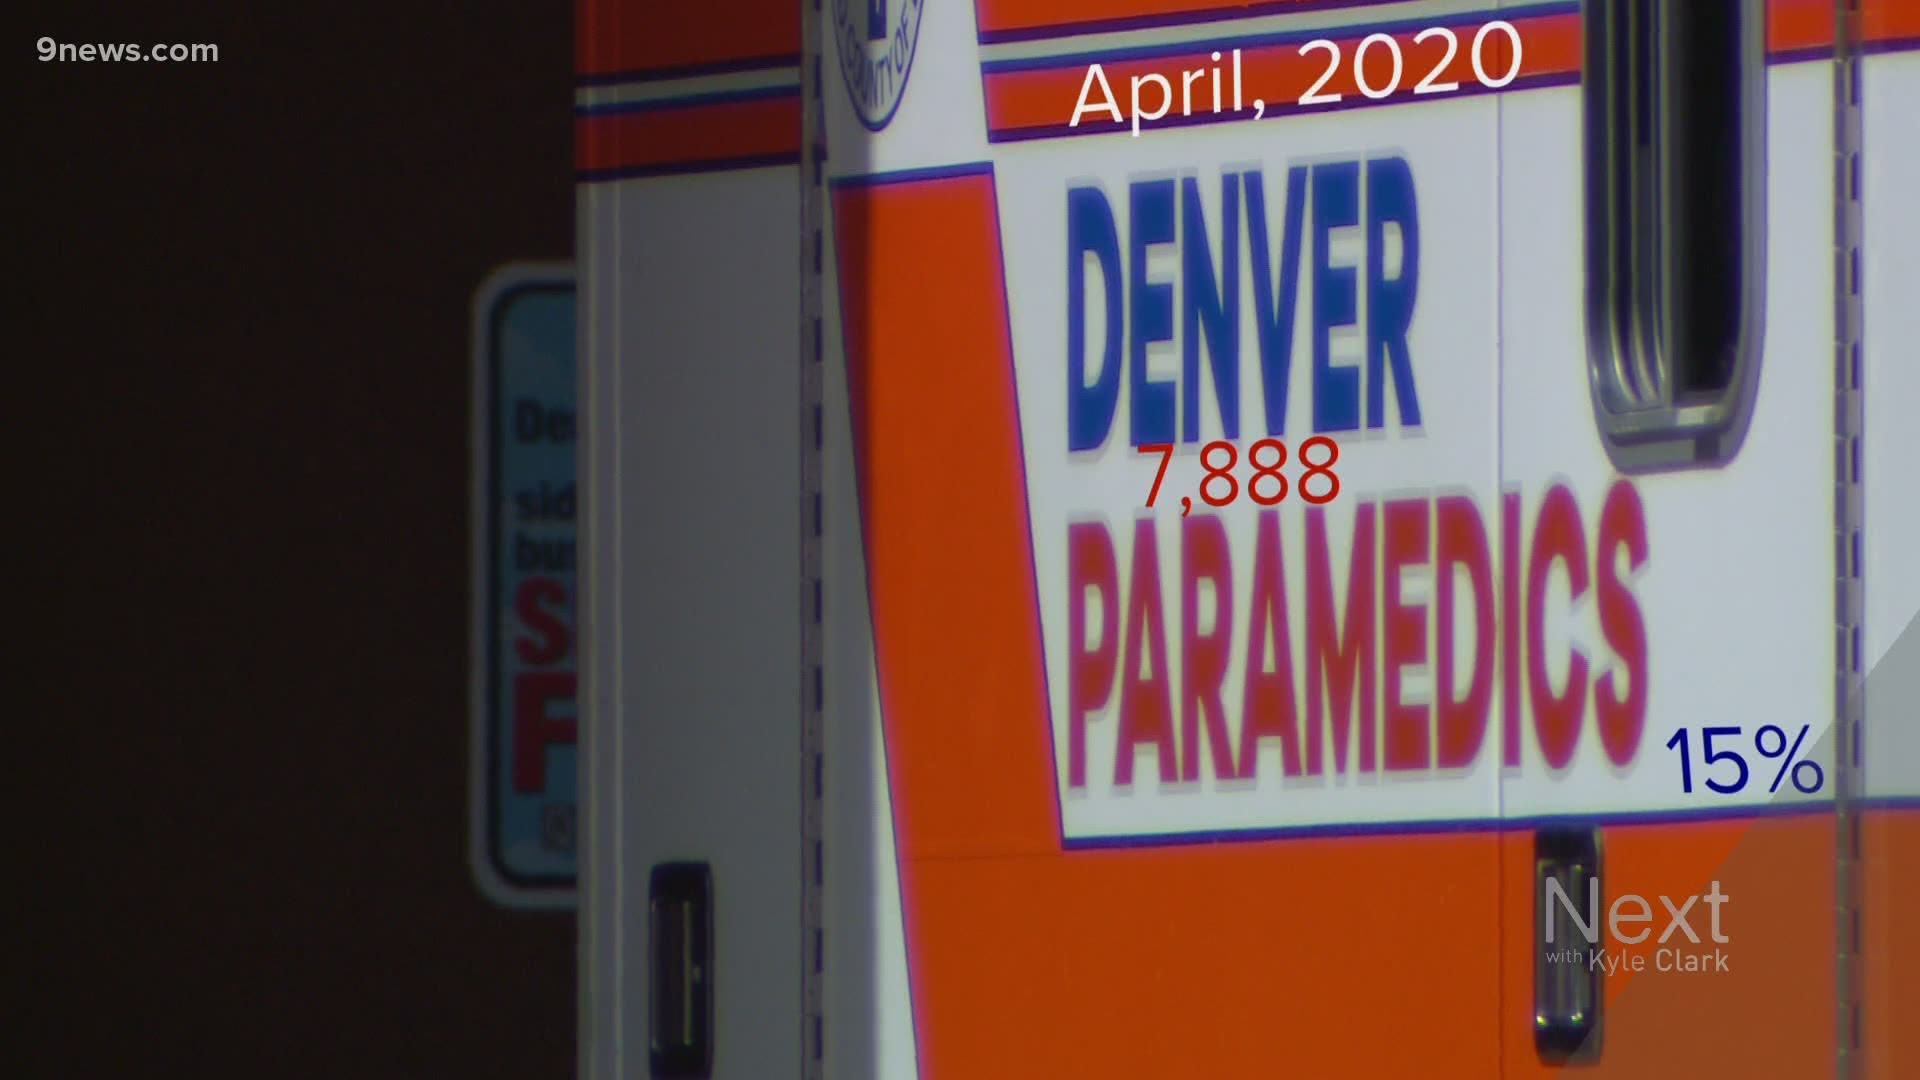 When the pandemic began, Denver Health paramedics were prepared to be overwhelmed with the addition of COVID-19 patients. Instead, calls are abnormally low. Why?